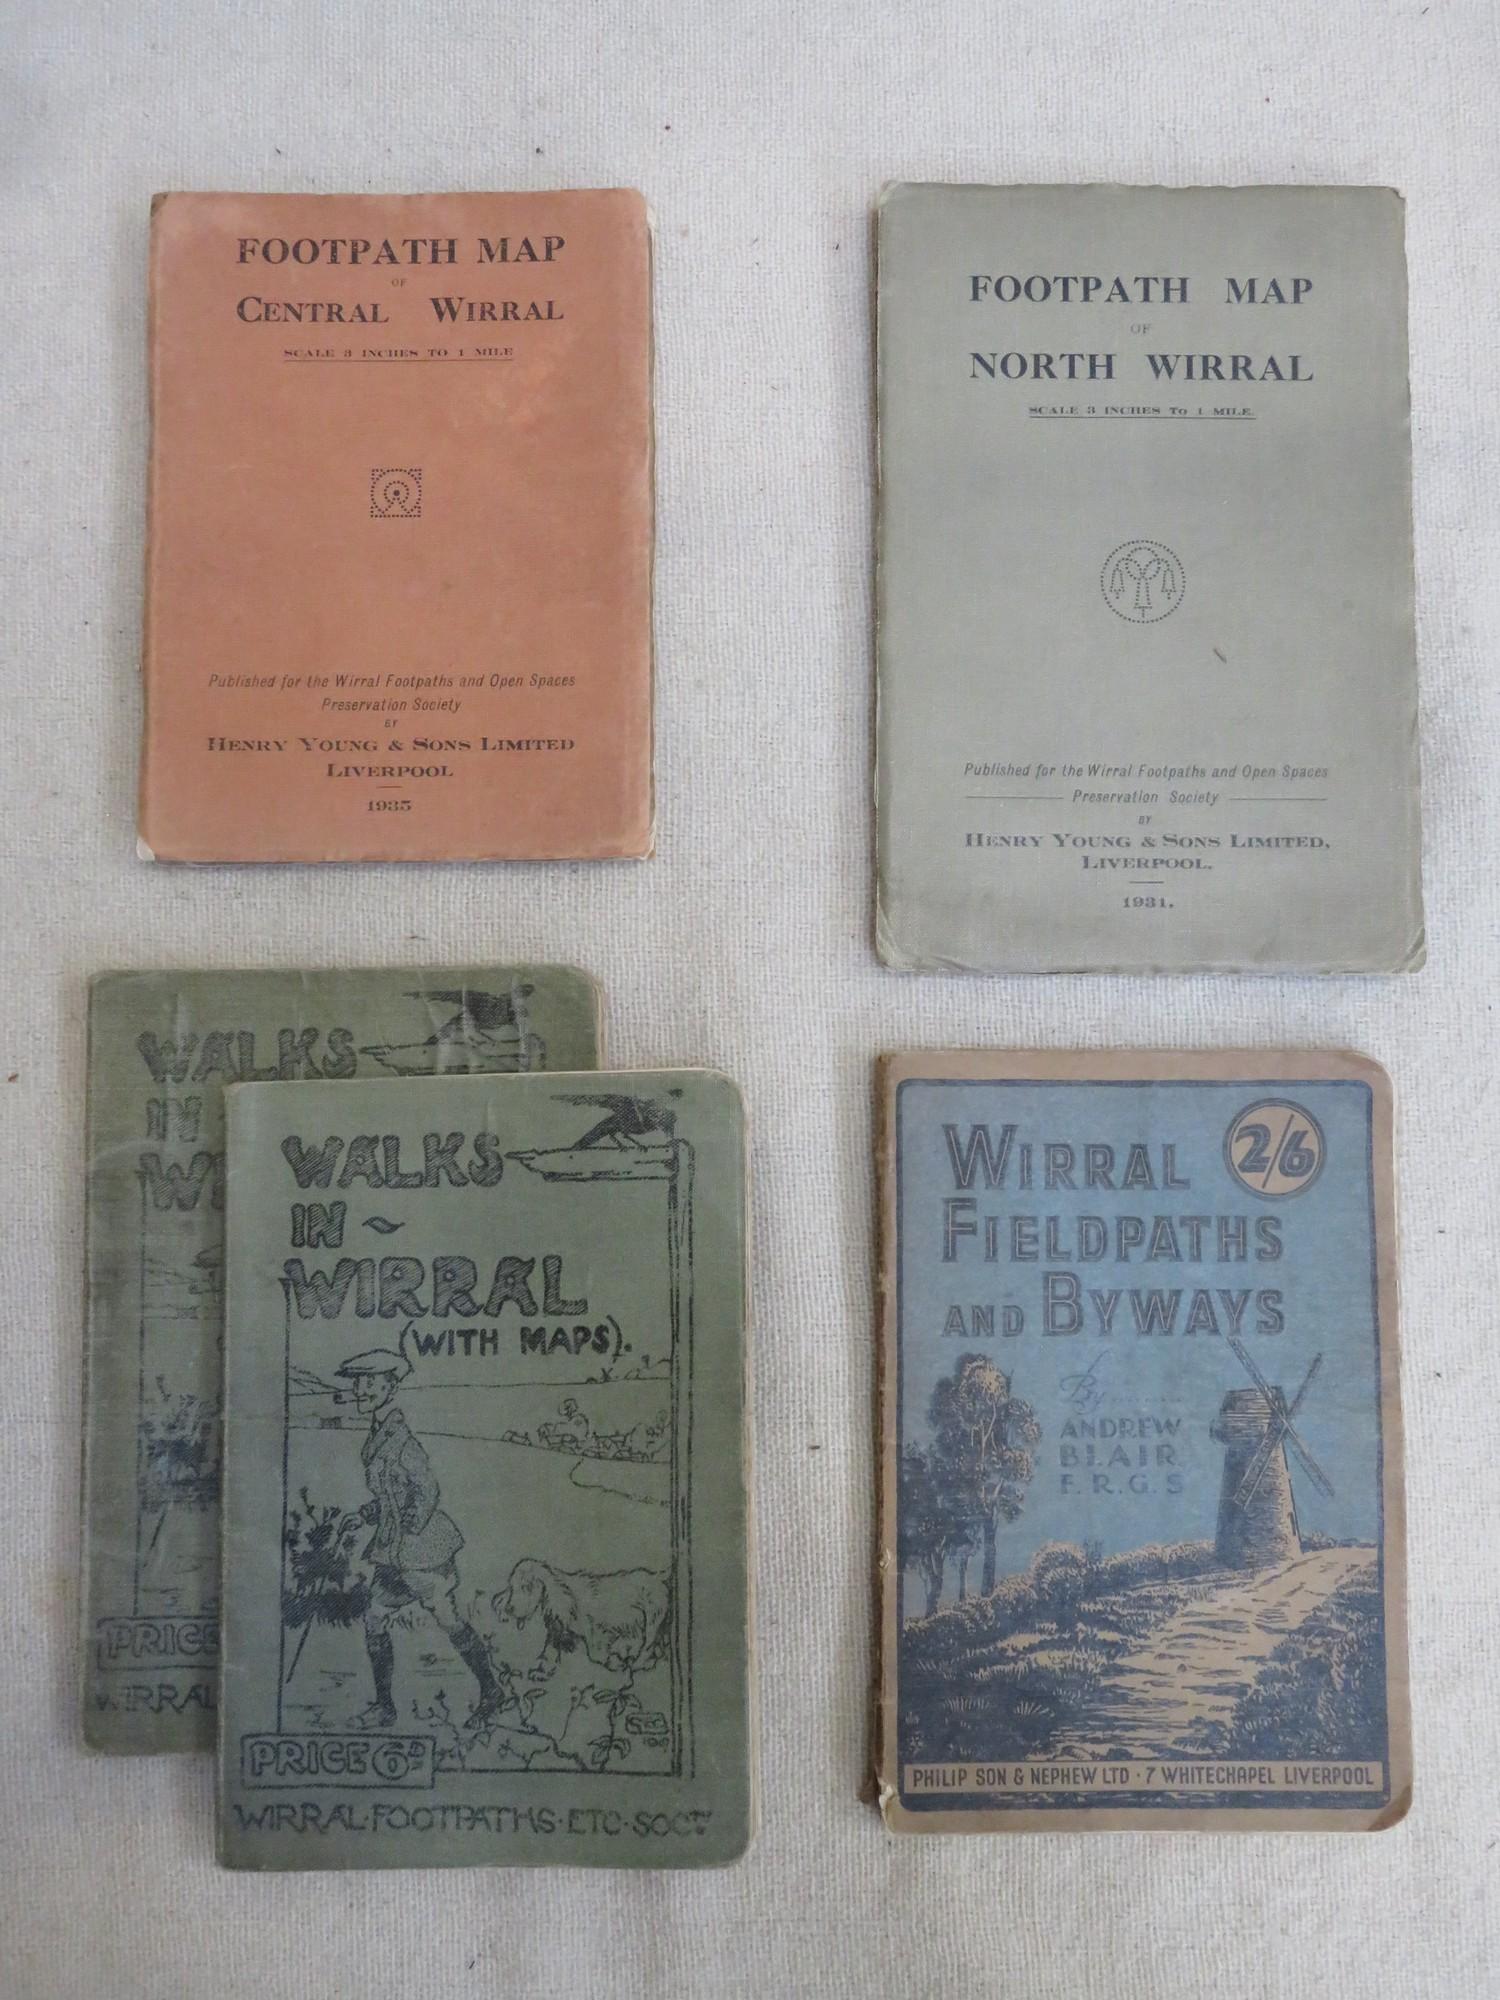 Two 1930's canvas backed fold out footpath maps of North Wirral and Central Wirral, both by Henry